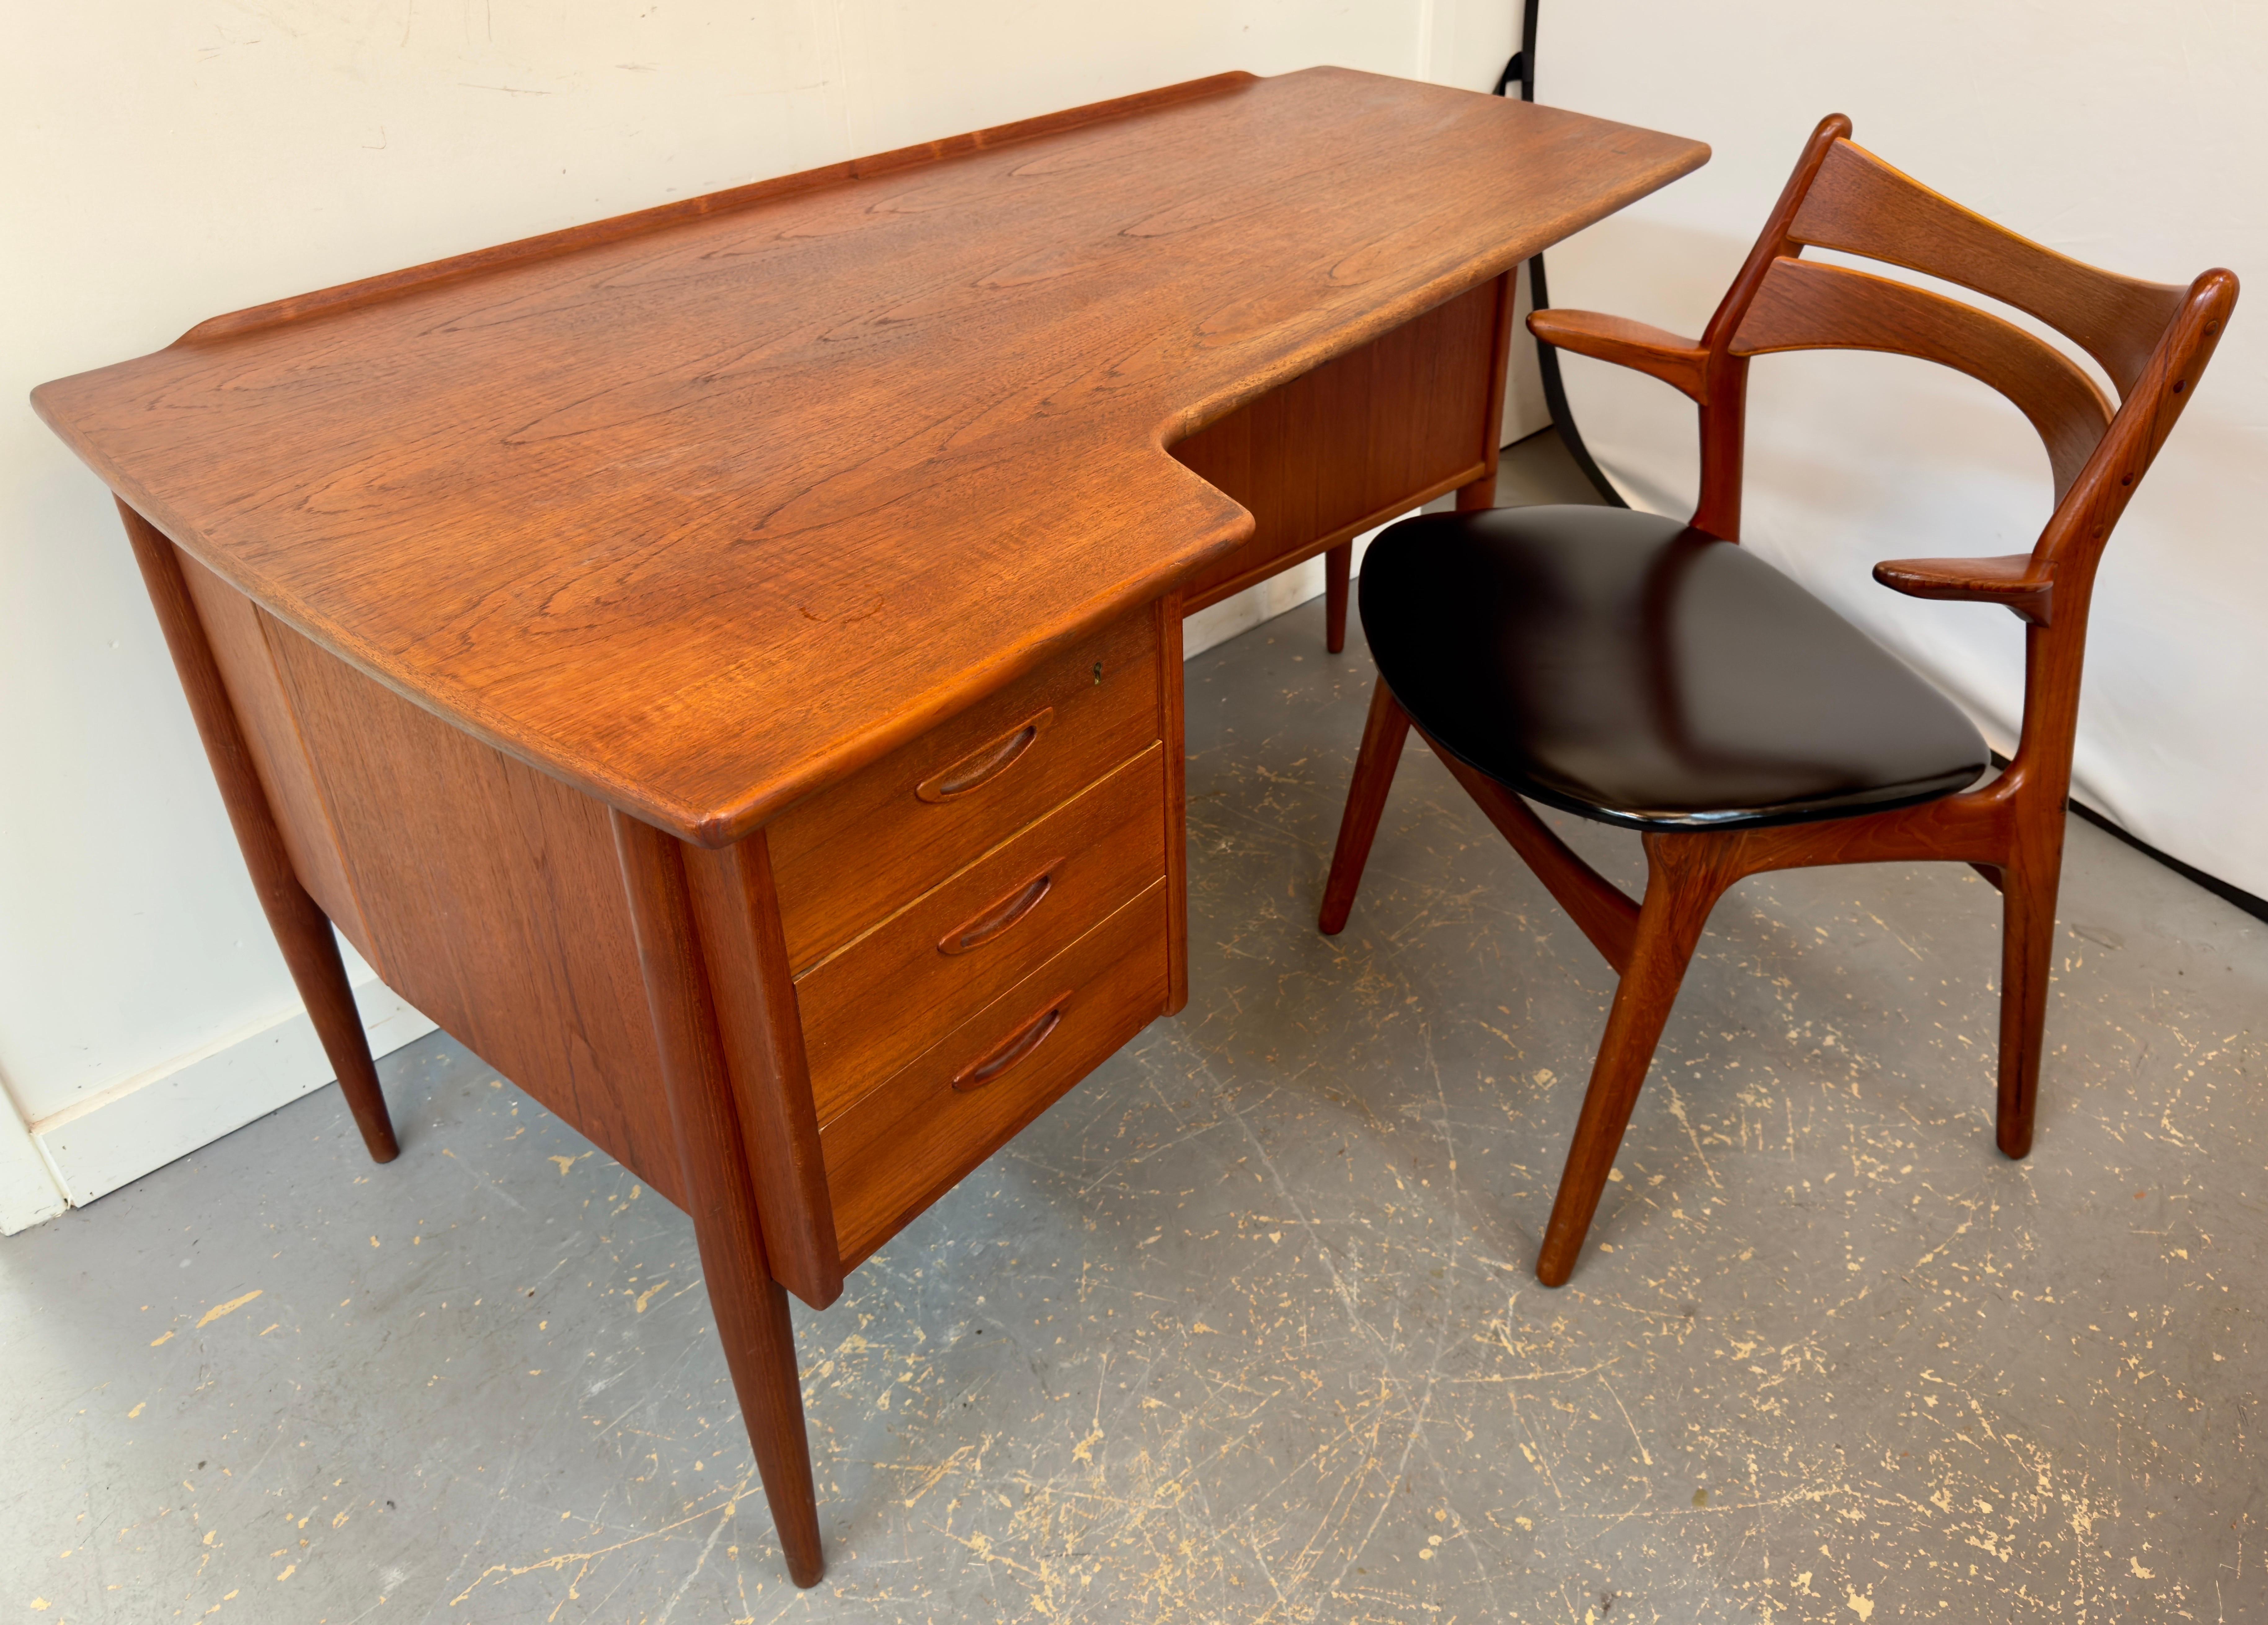 A Mid-Century Modern desk Model A10 l masterfully crafted by Göran Strand for Lelångs Möbelfabrik in Sweden during the 1960s.  
The allure of the Desk Model A10 lies in its thoughtful using teak, a wood known for its rich tones and grain patterns,